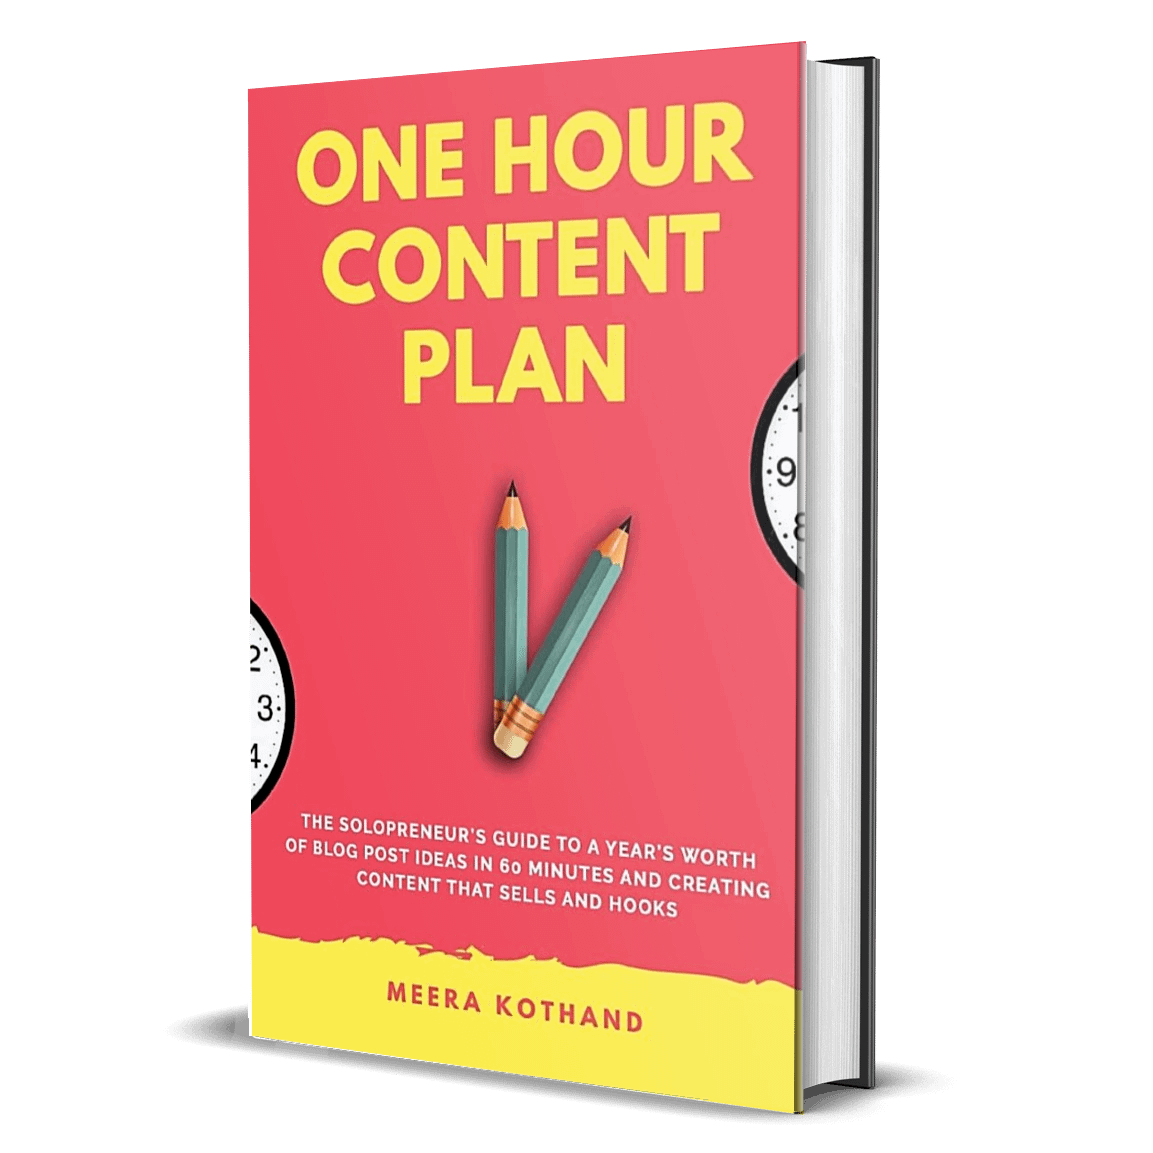 One Hour Content Plan by Meera Kothand is consistently cited as one of the best blogging books to improve your content creation.